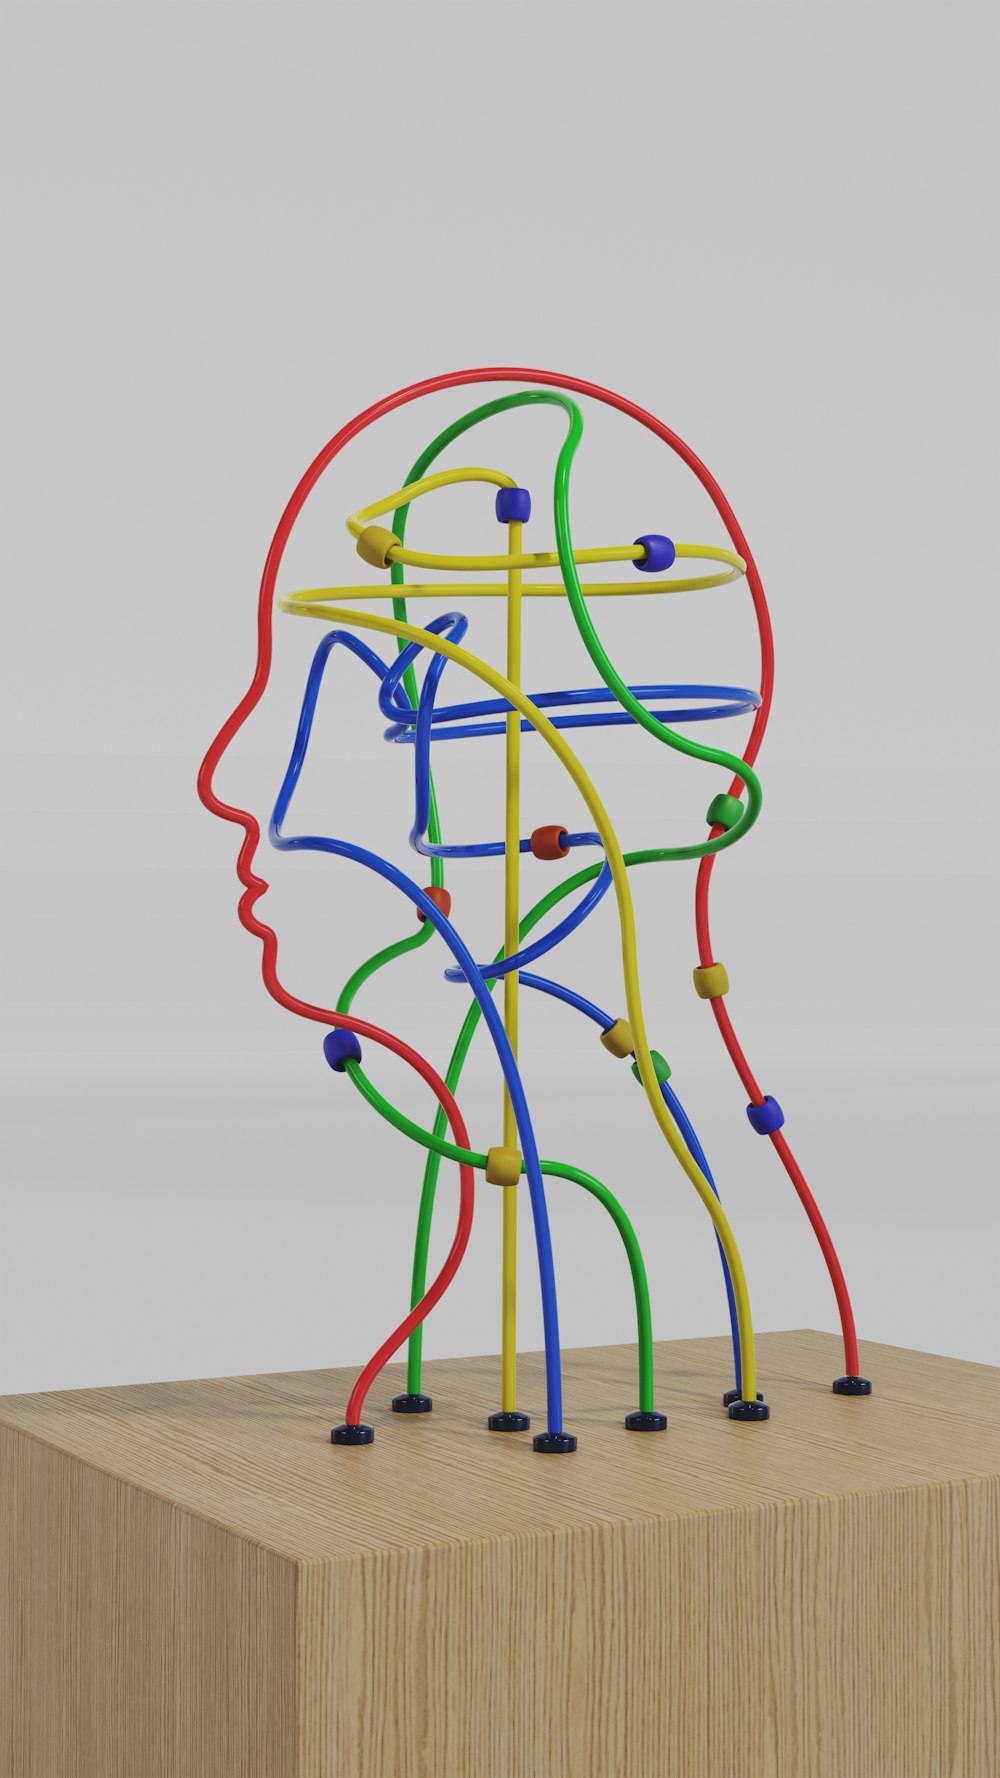 a sculpture of a man's head made of colored wires